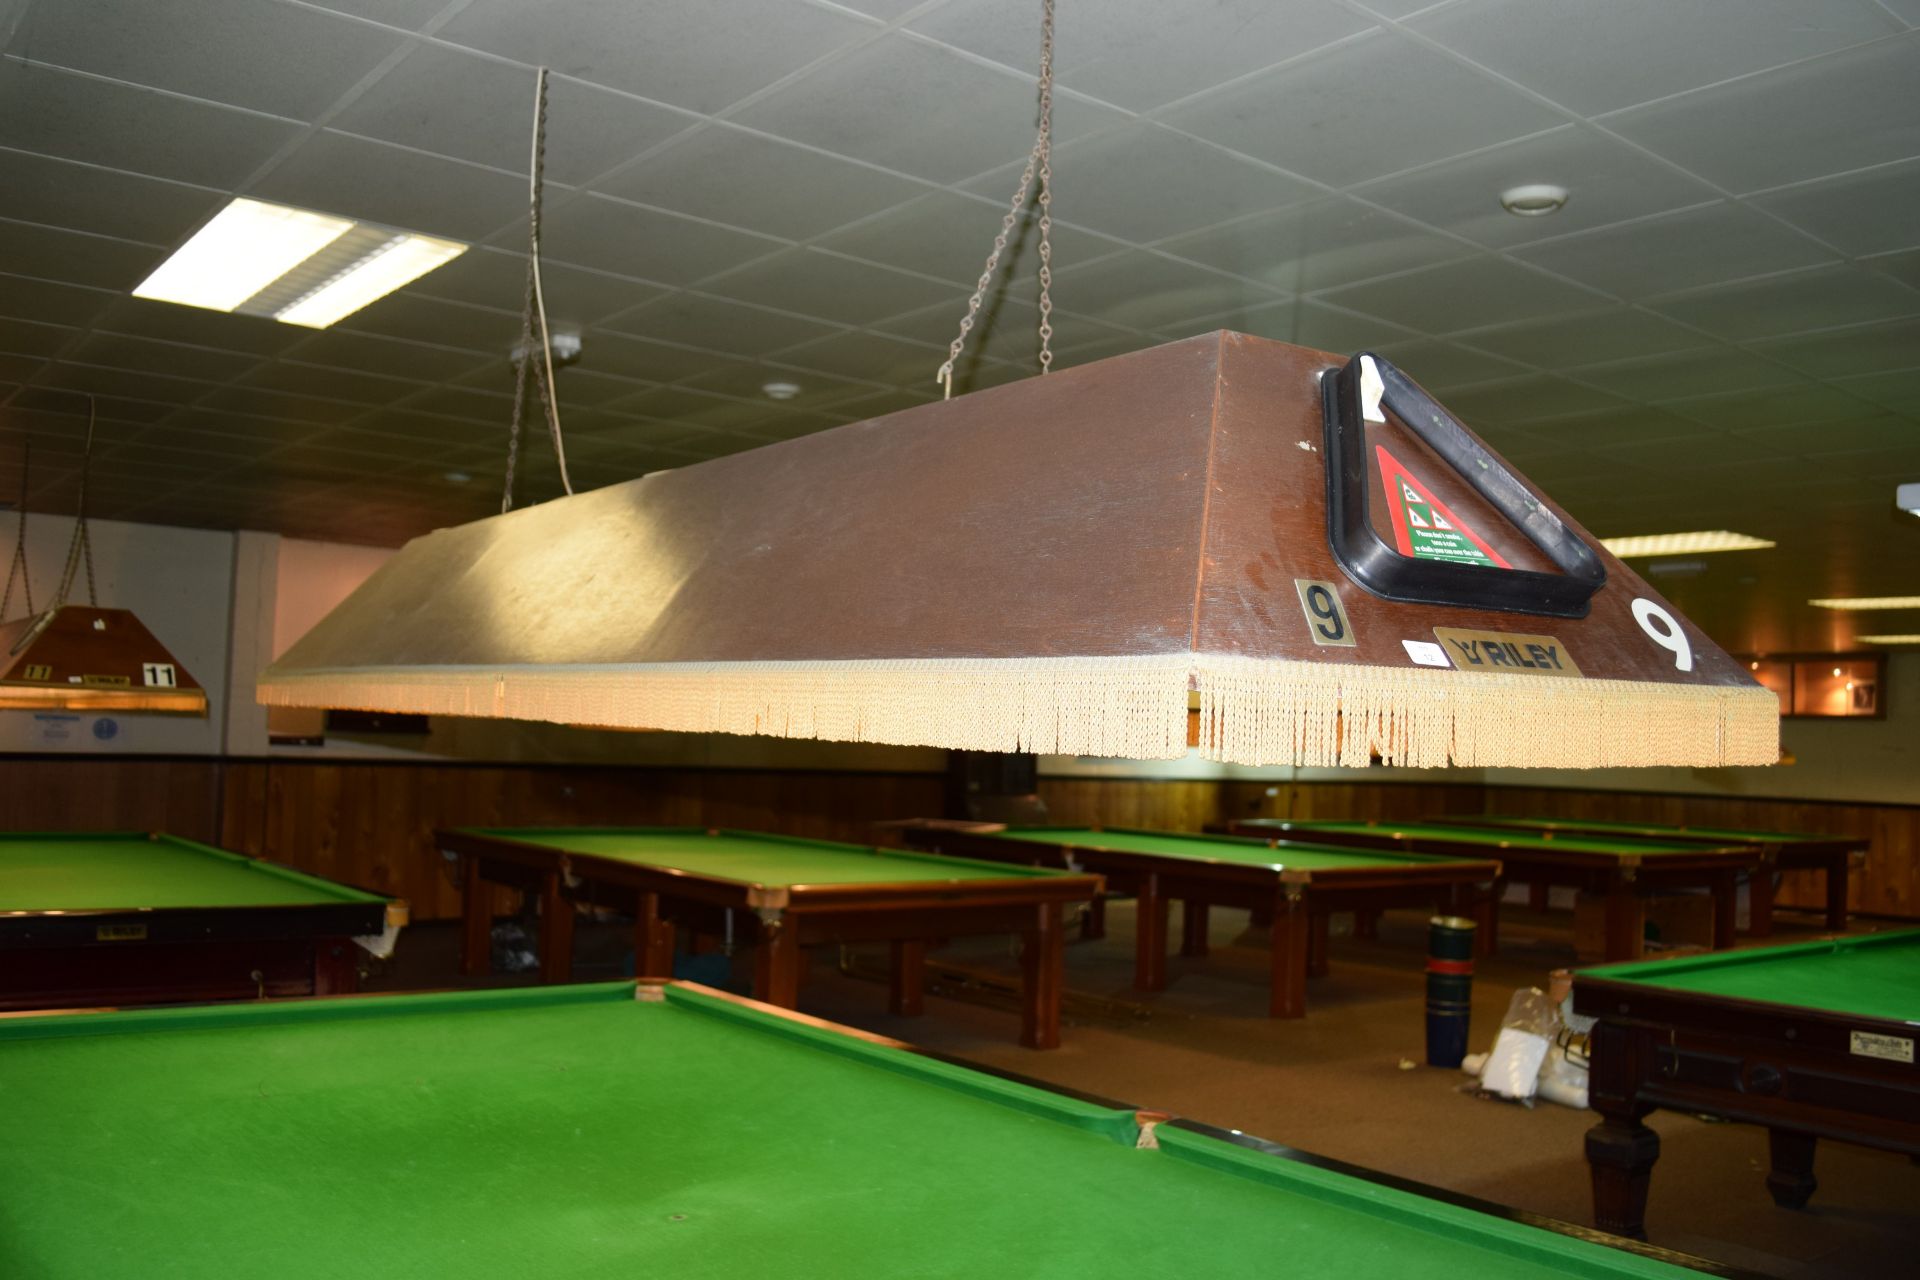 Riley traditional full size snooker table lighting shade